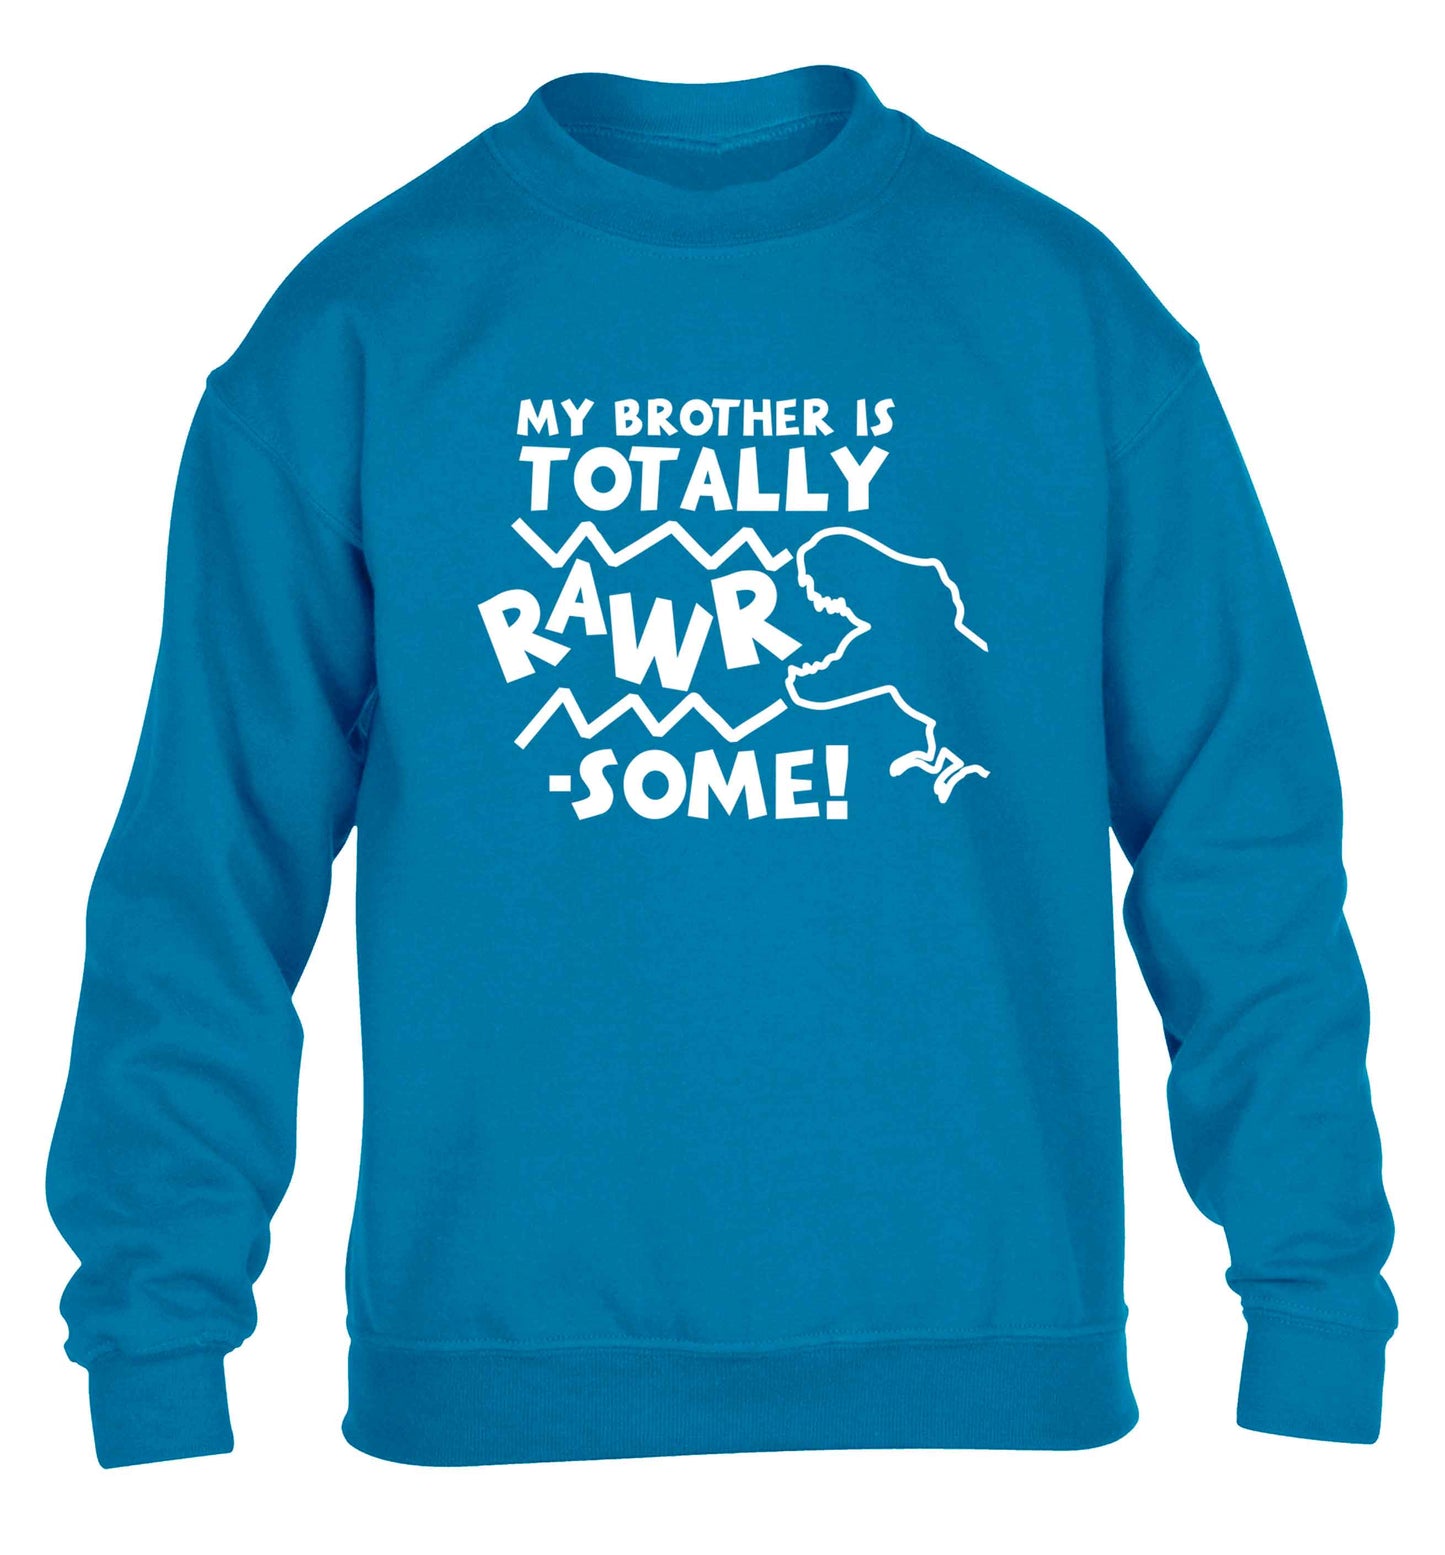 My brother is totally rawrsome children's blue sweater 12-13 Years